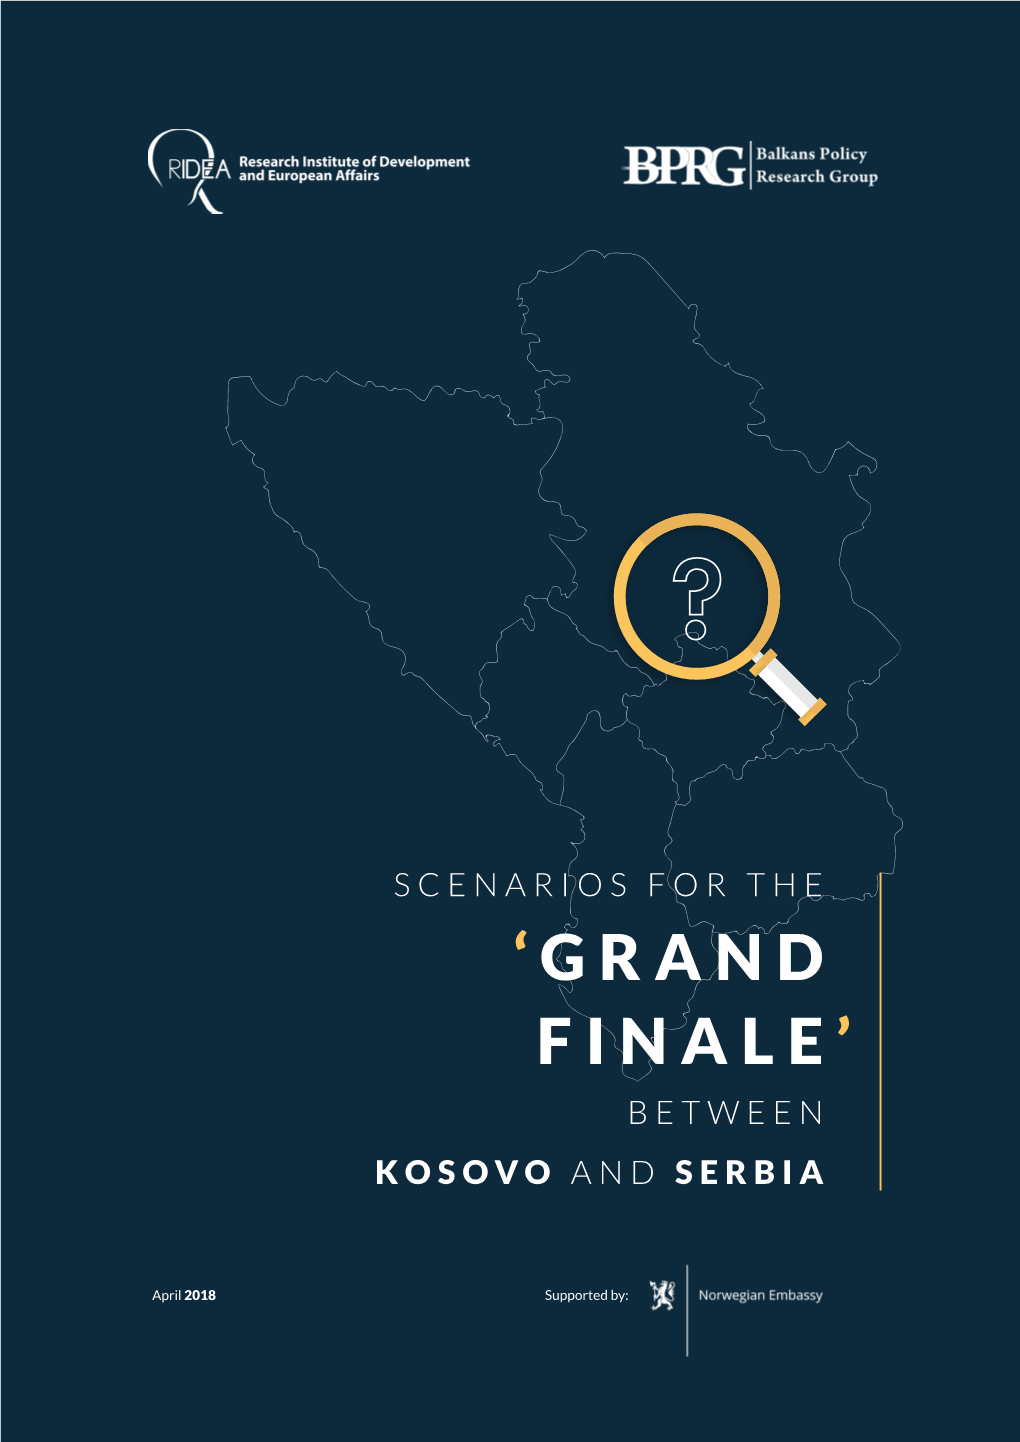 SCENARIOS-FOR-THE-GRAND-FINALE-BETWEEN-KOSOVO-AND-SERBIA-2.Pdf